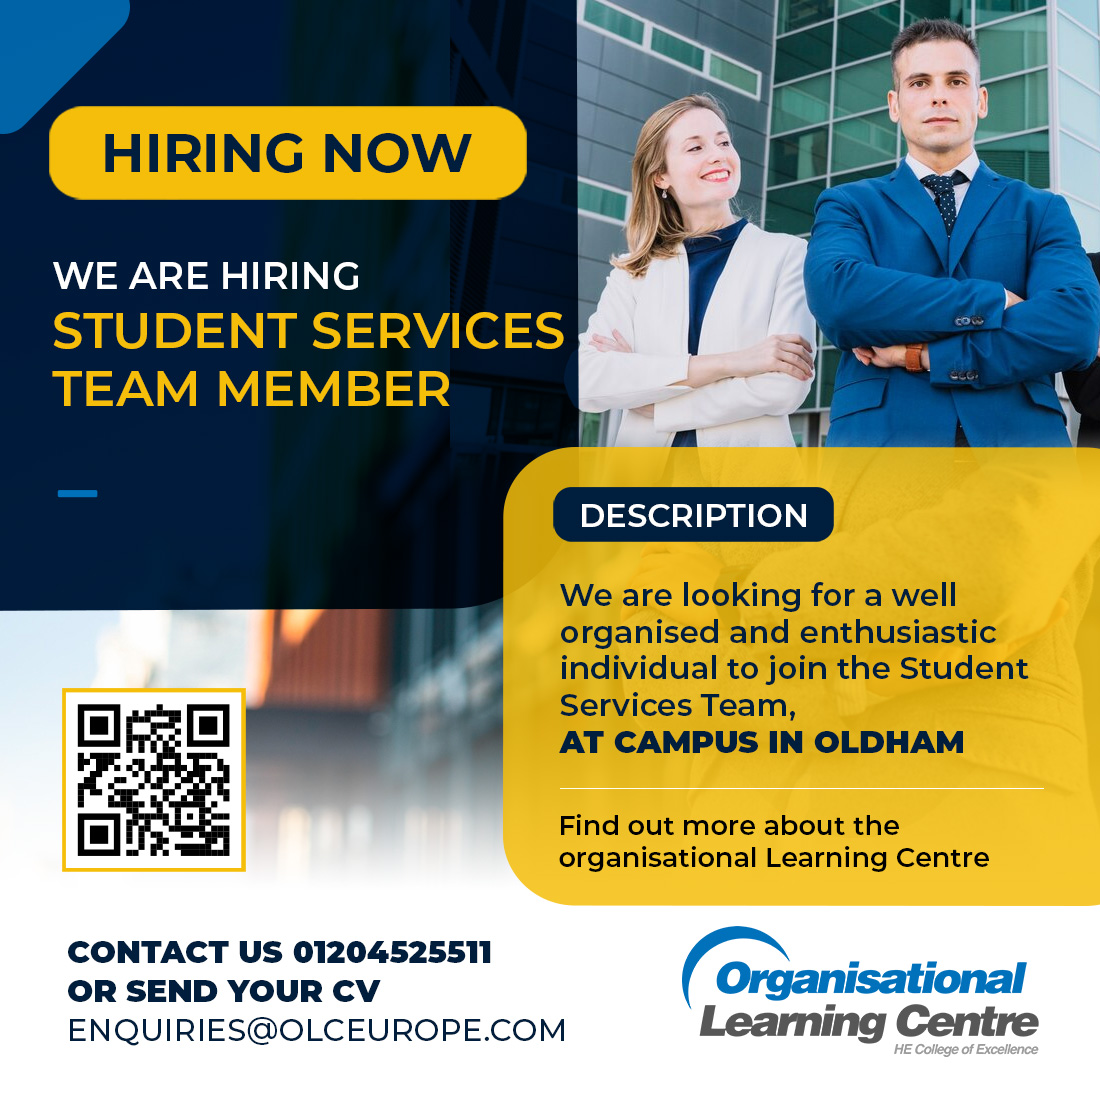 We are looking for a Student Services Team member to join our Campus in Oldham. If you are interested, please send in your CV to enquiries@olceurope.com If you require any further information, then contact us now on 0120452551.

#jobopportunity #programmemanager #ApplyNow